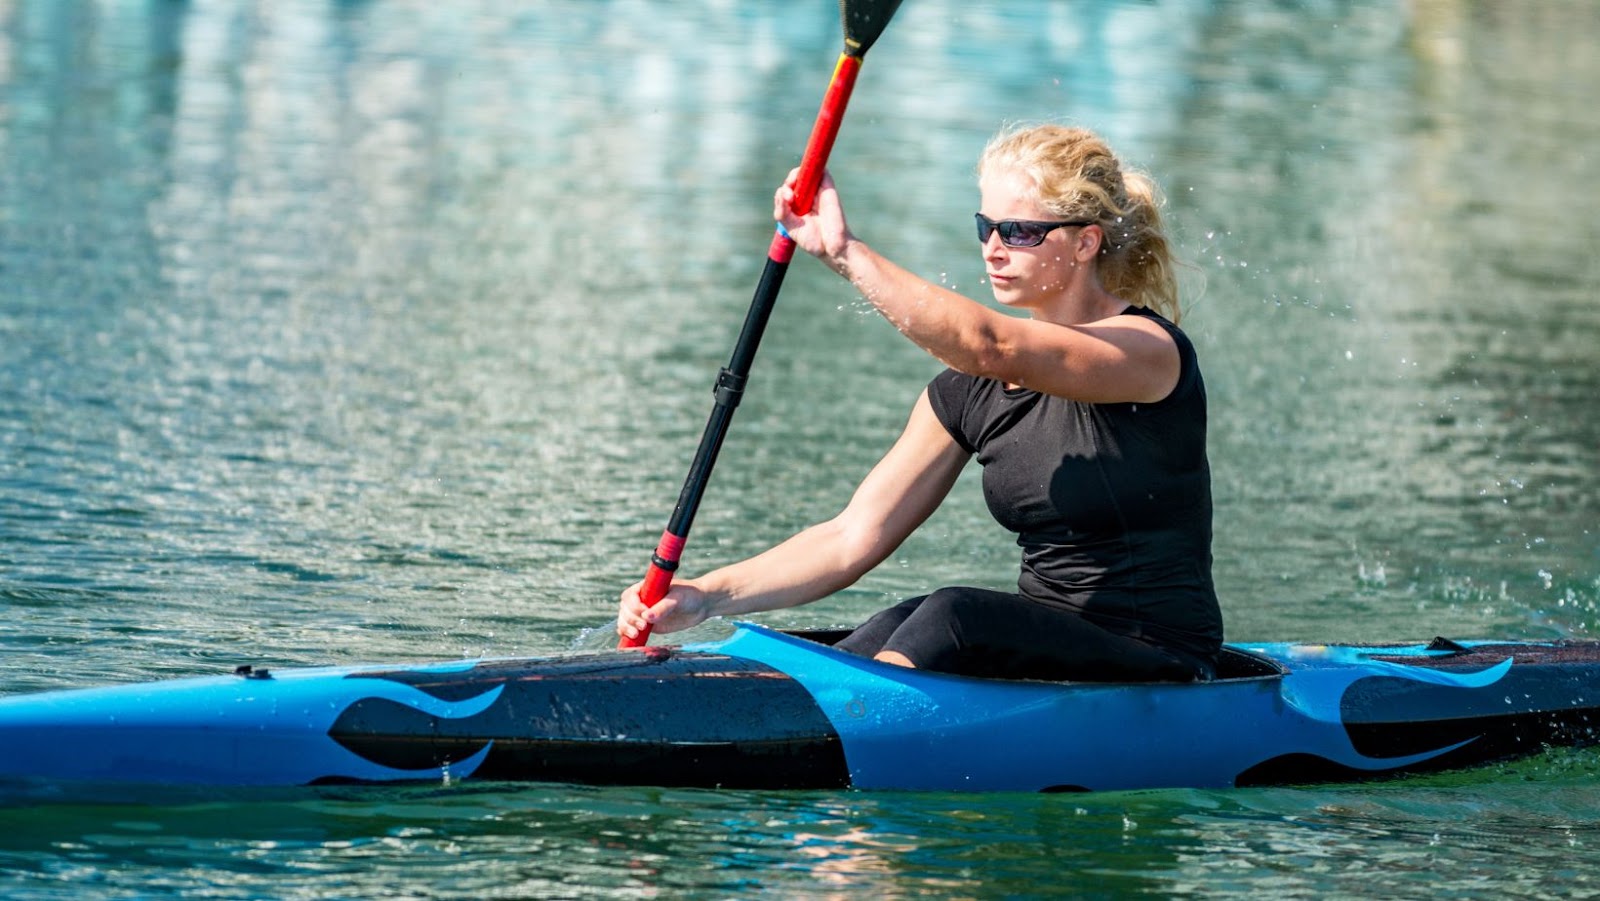 The Best Kayaking Clothes For Different Budgets